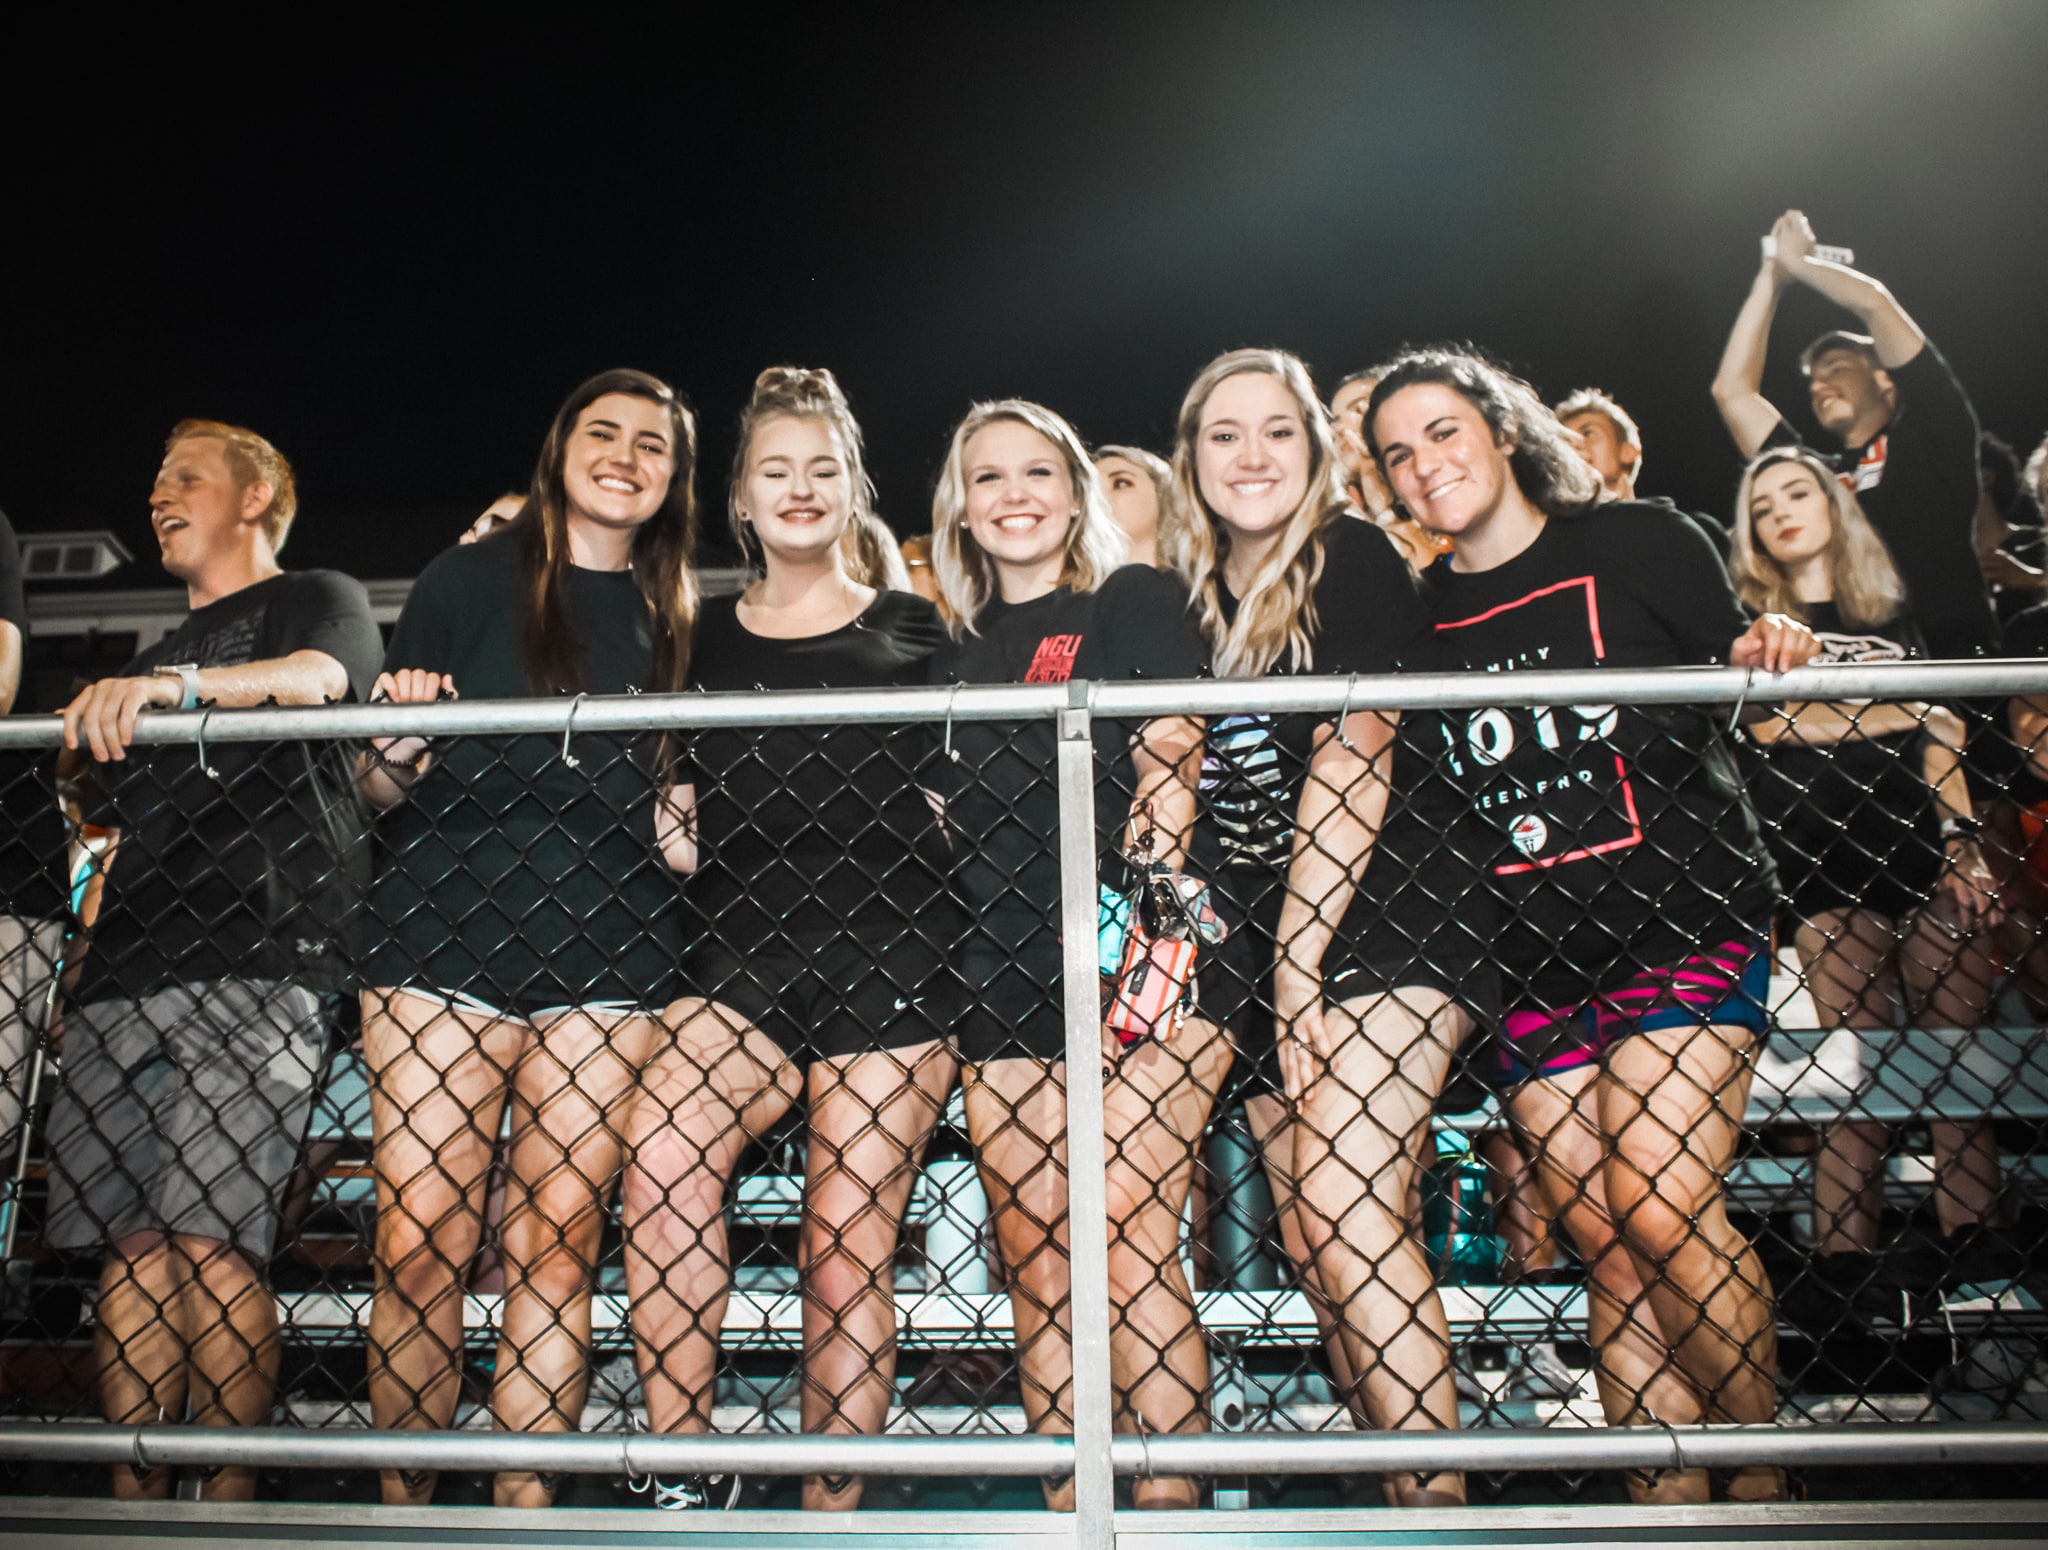 Jacob Morris, Jessica Gasque, Kelsey Truluch, Mary Collins, Nicole Pollard, and Mandie Trainer hanging out in the student section.